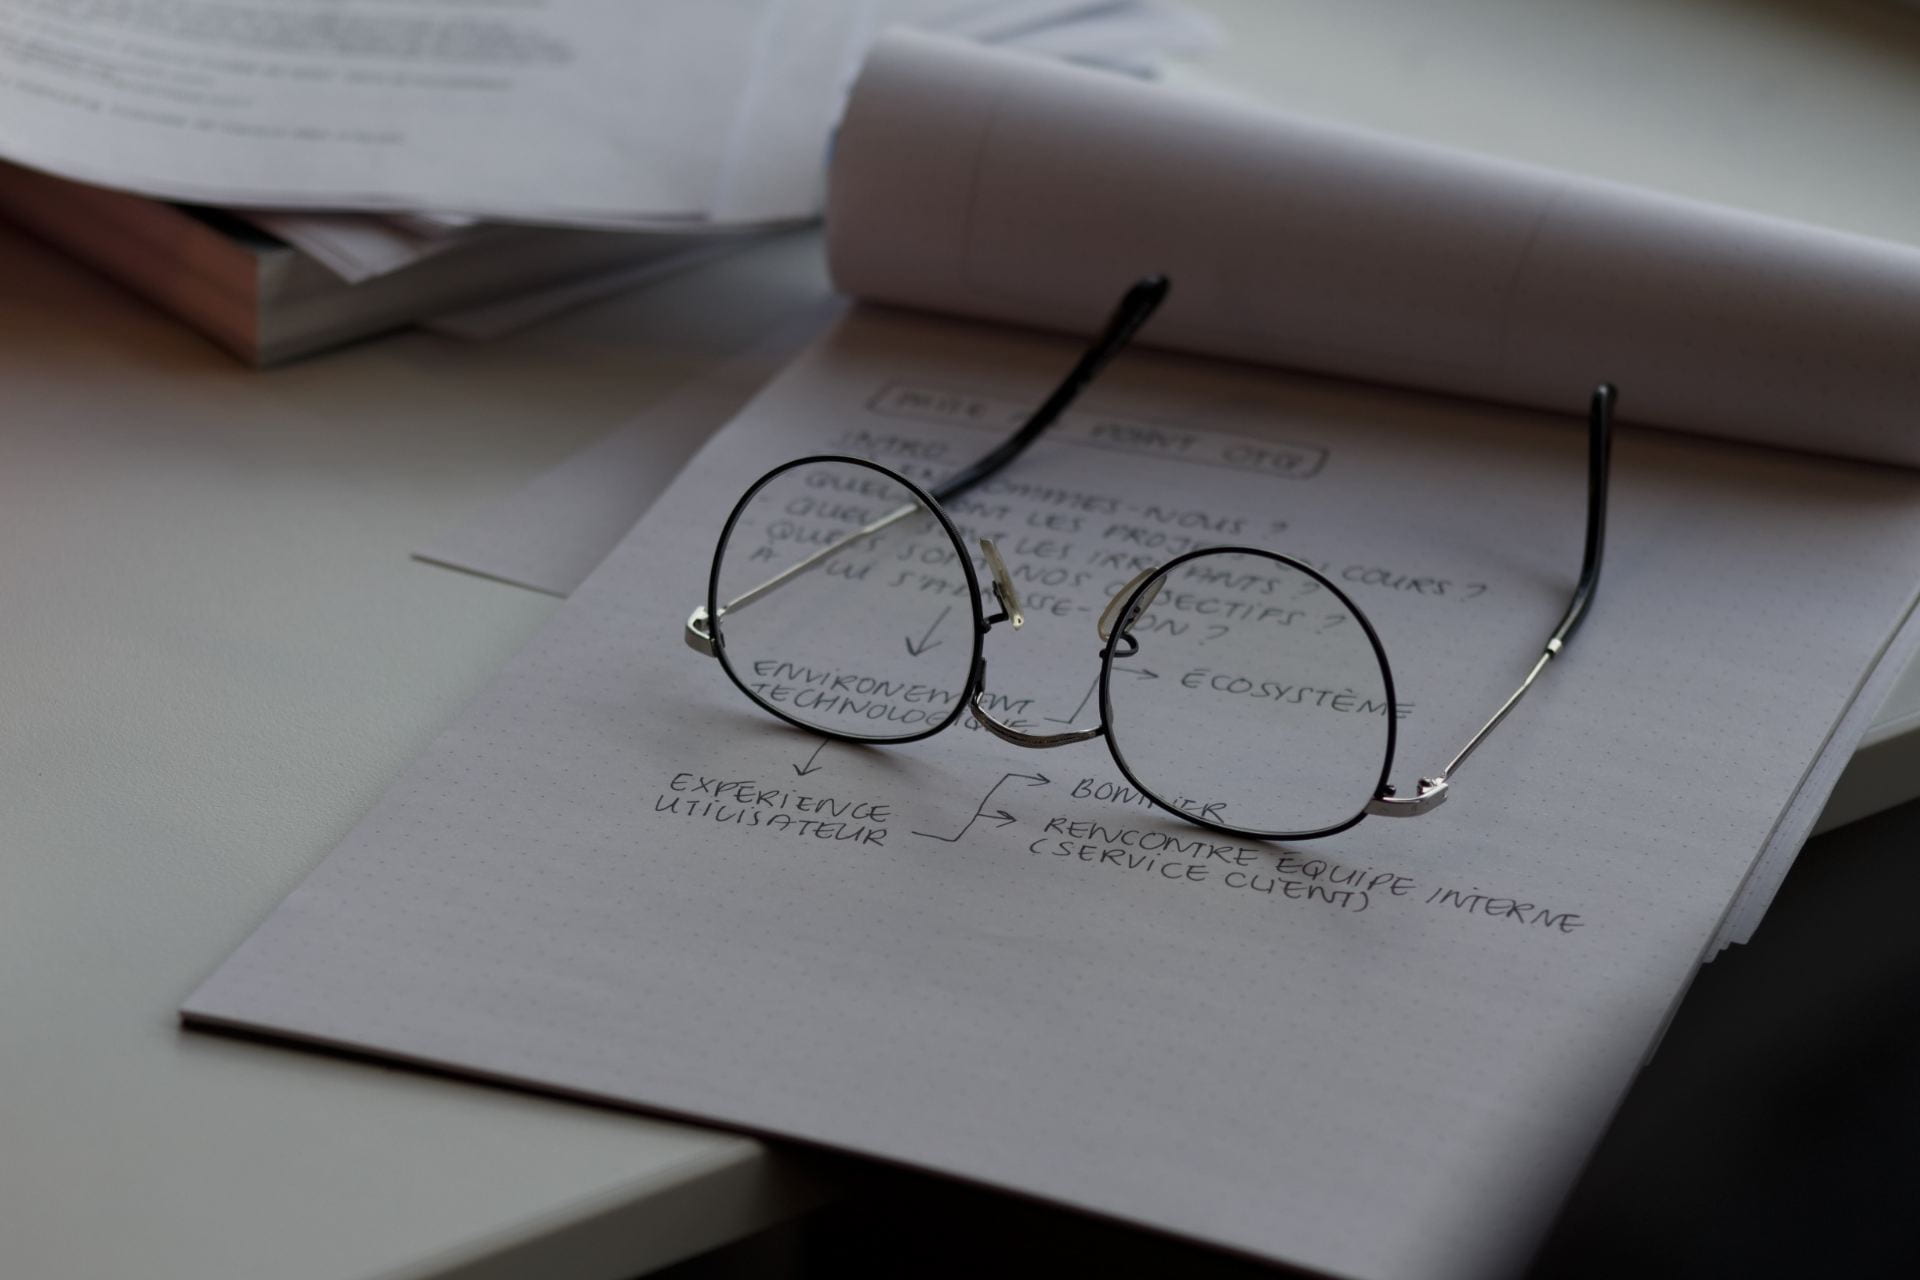 A pair of glasses rests on the open pages of a notepad.